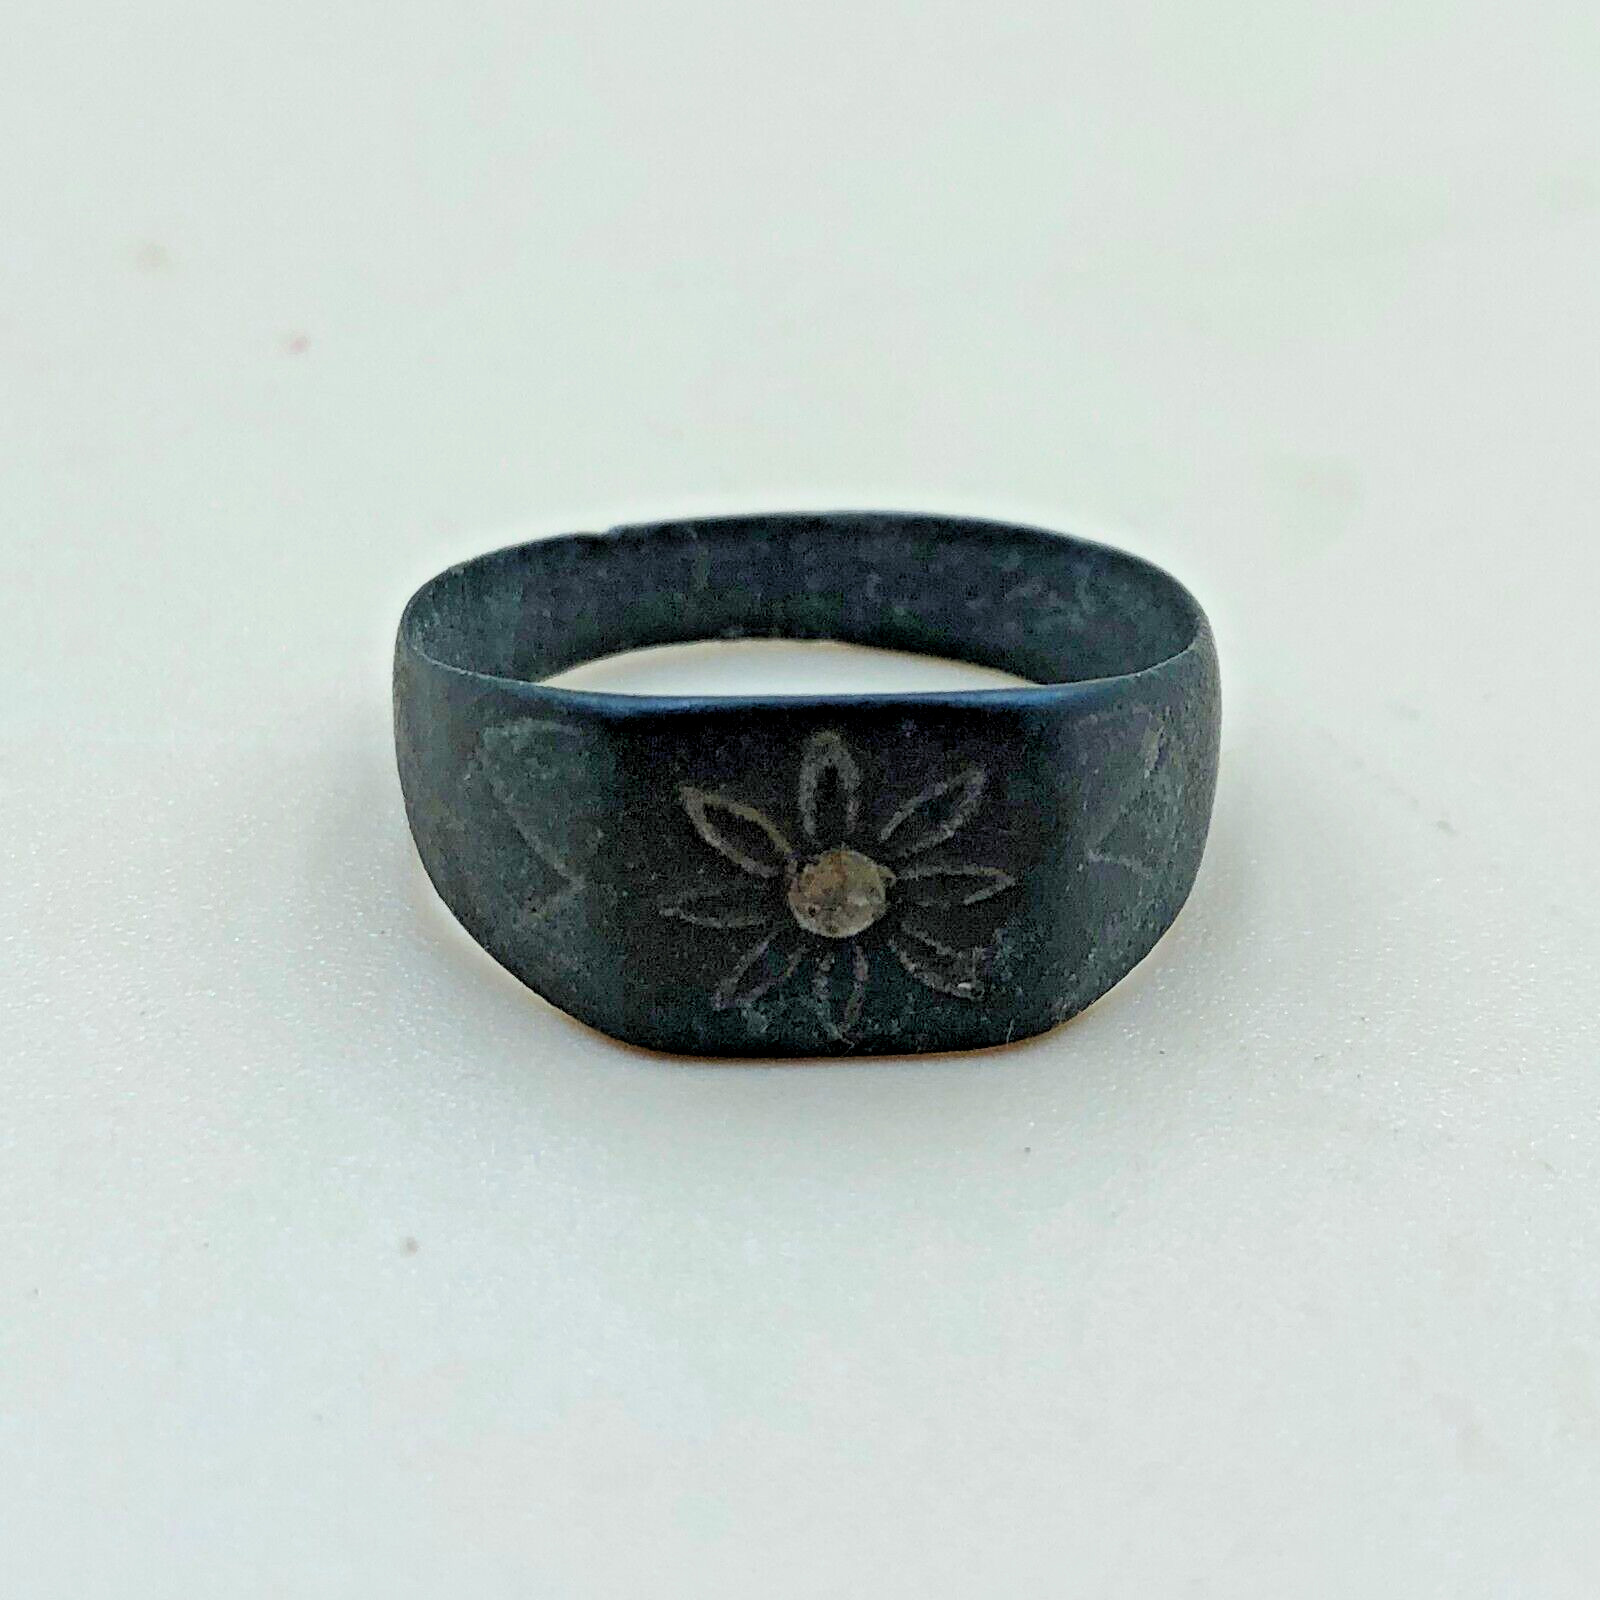 Original WW2 WWII Soldiers  Ring of trench creativity \